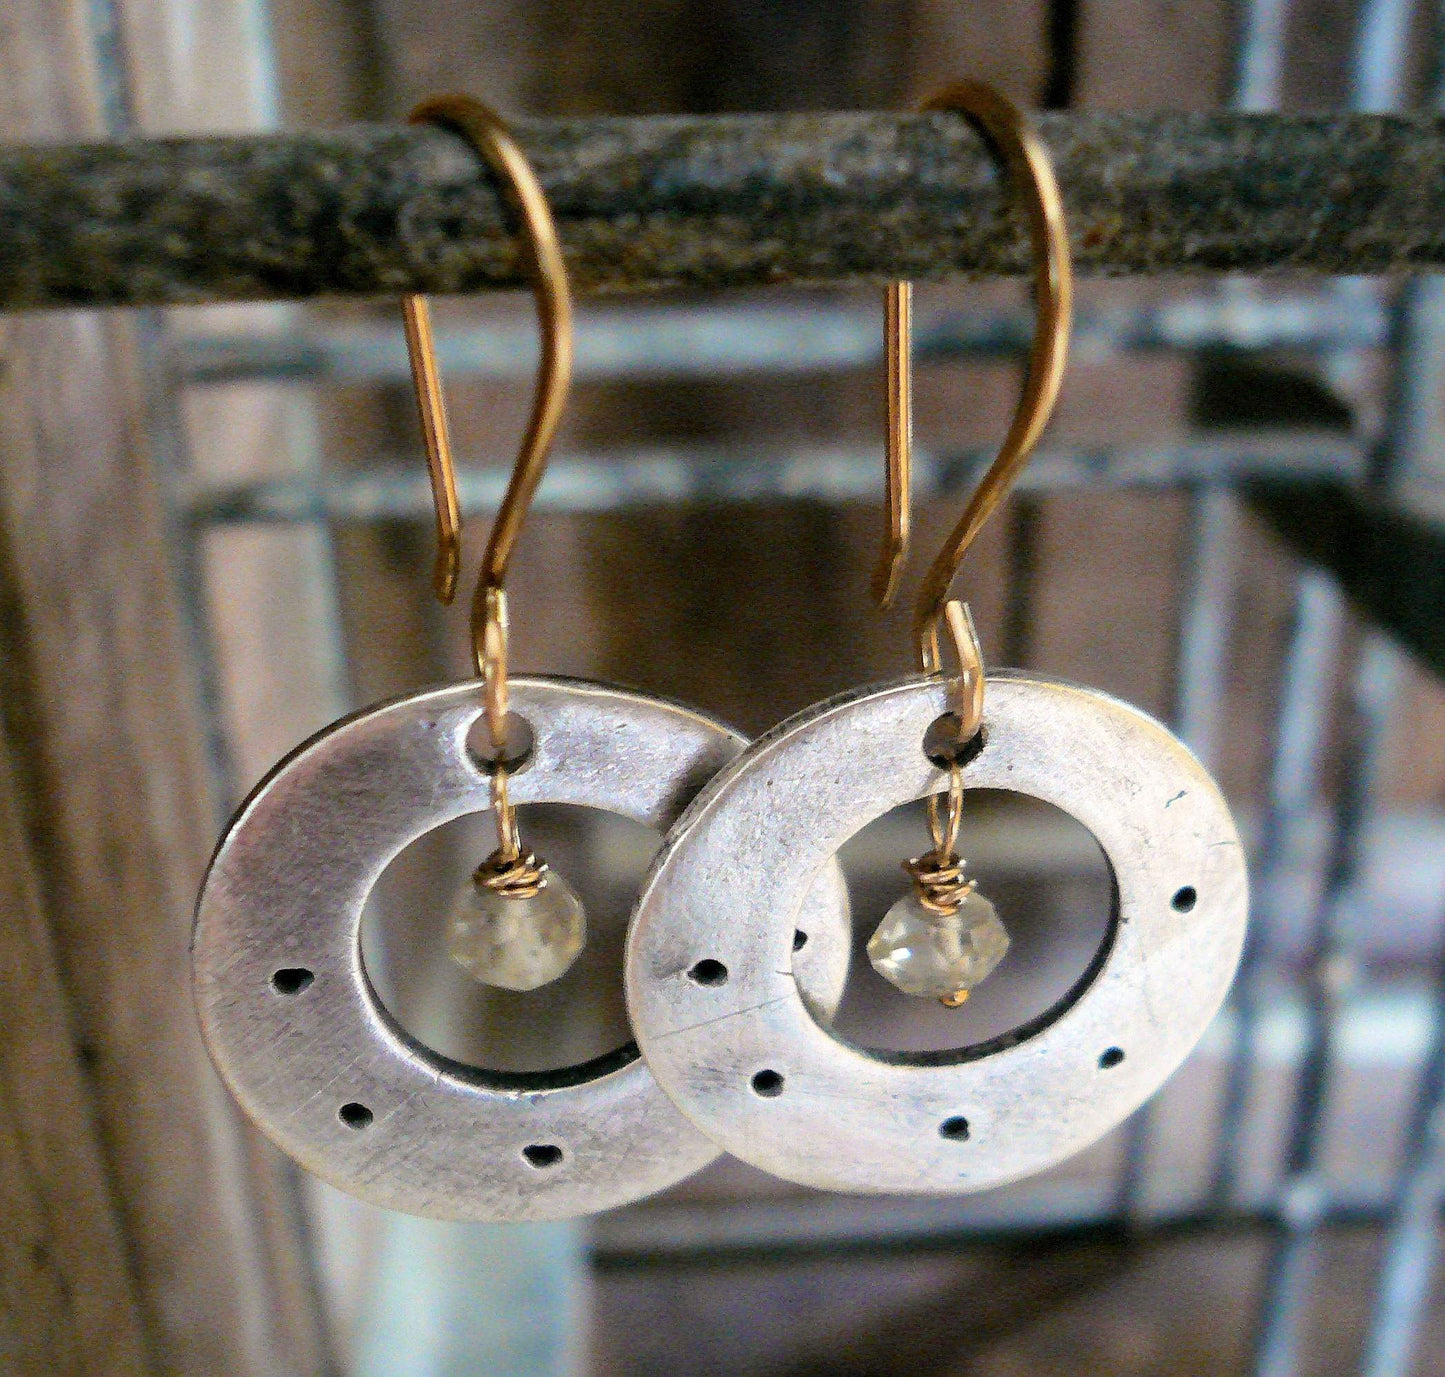 Soleil Collection Orbital Earrings - Oxidized fine silver. 14kt Goldfill. Scapolite. Mixed Metal. Handmade